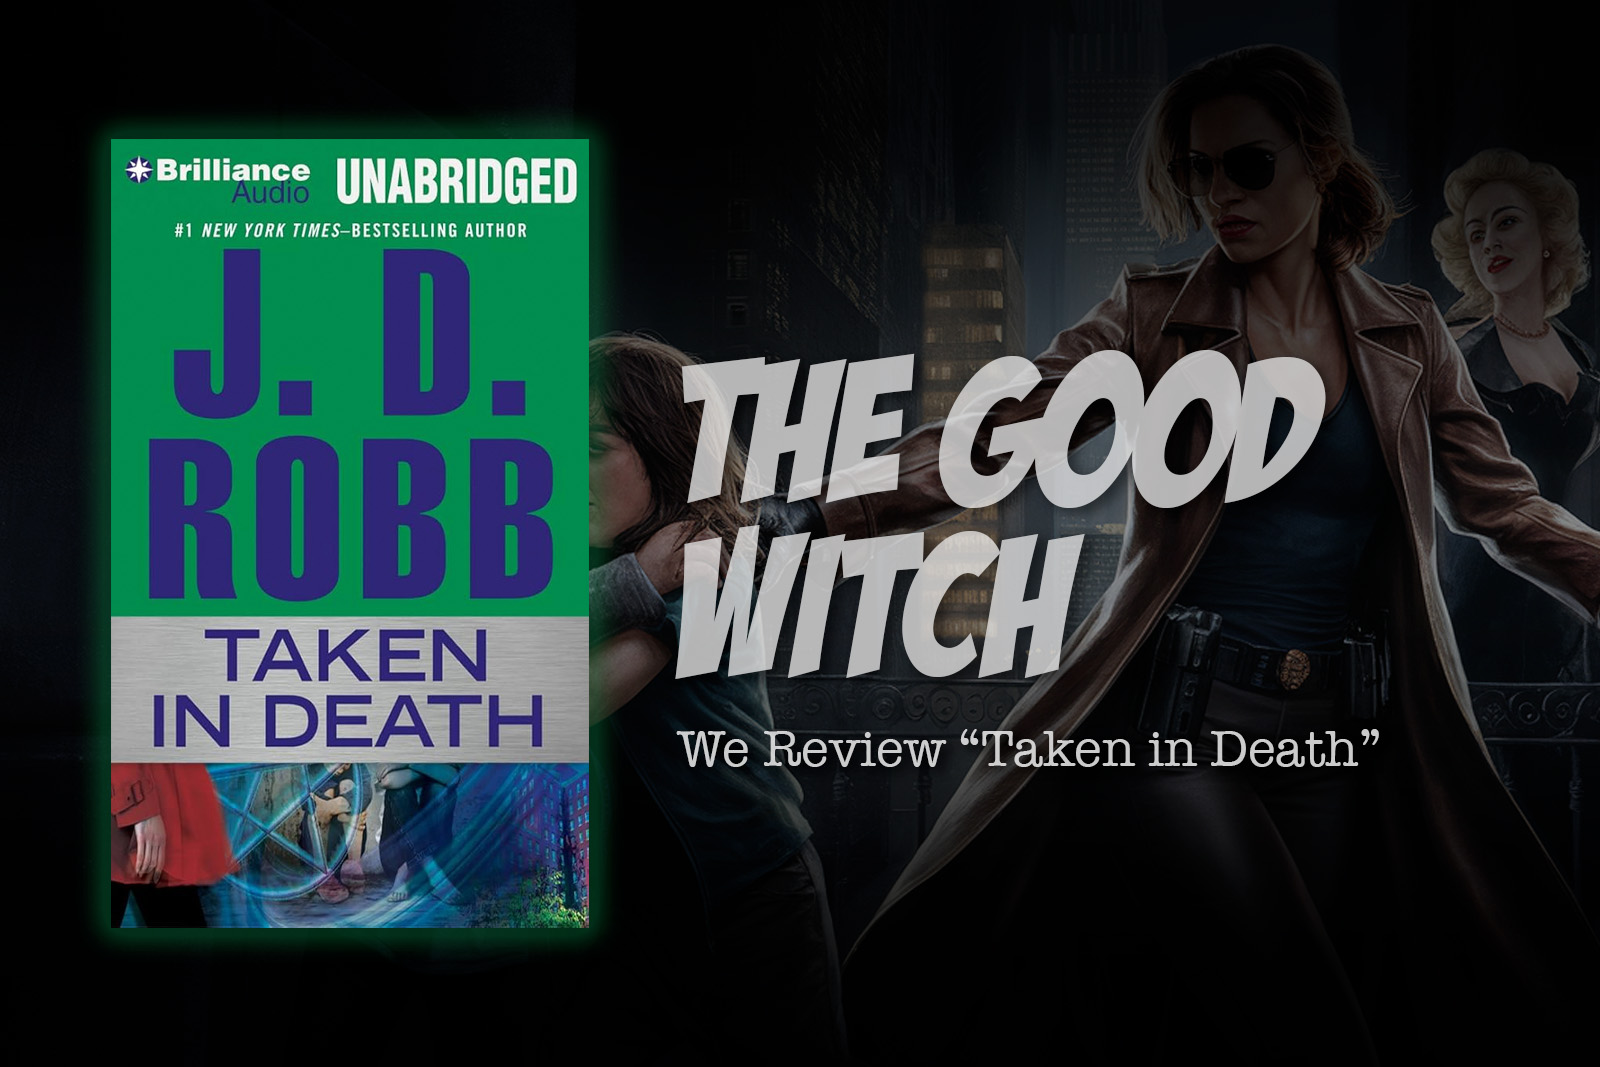 The Good Witch: We Review “Taken in Death”